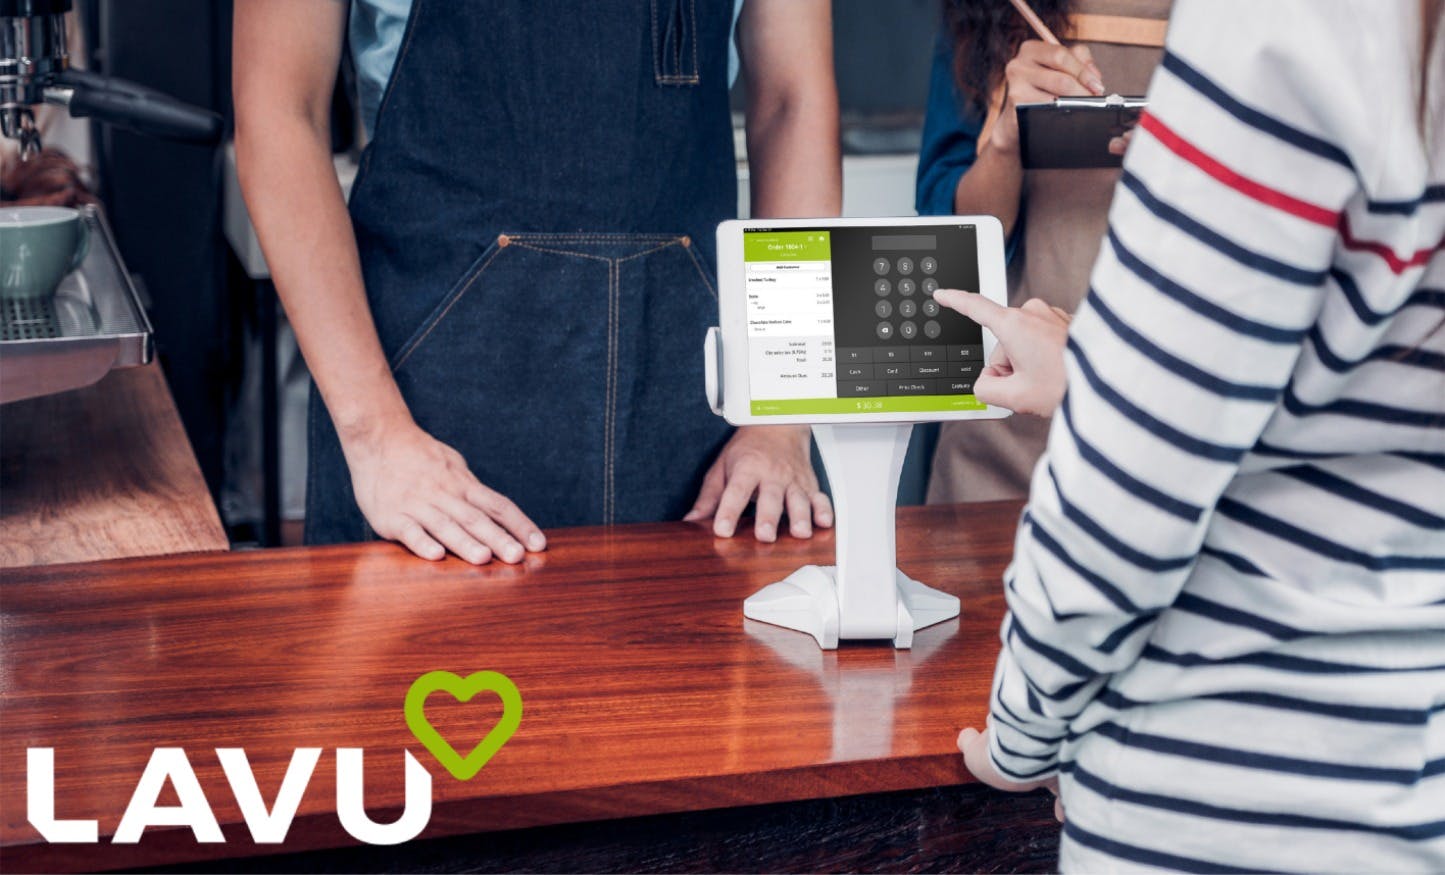 Lavu POS: Restaurant Solutions Built by Restaurant People